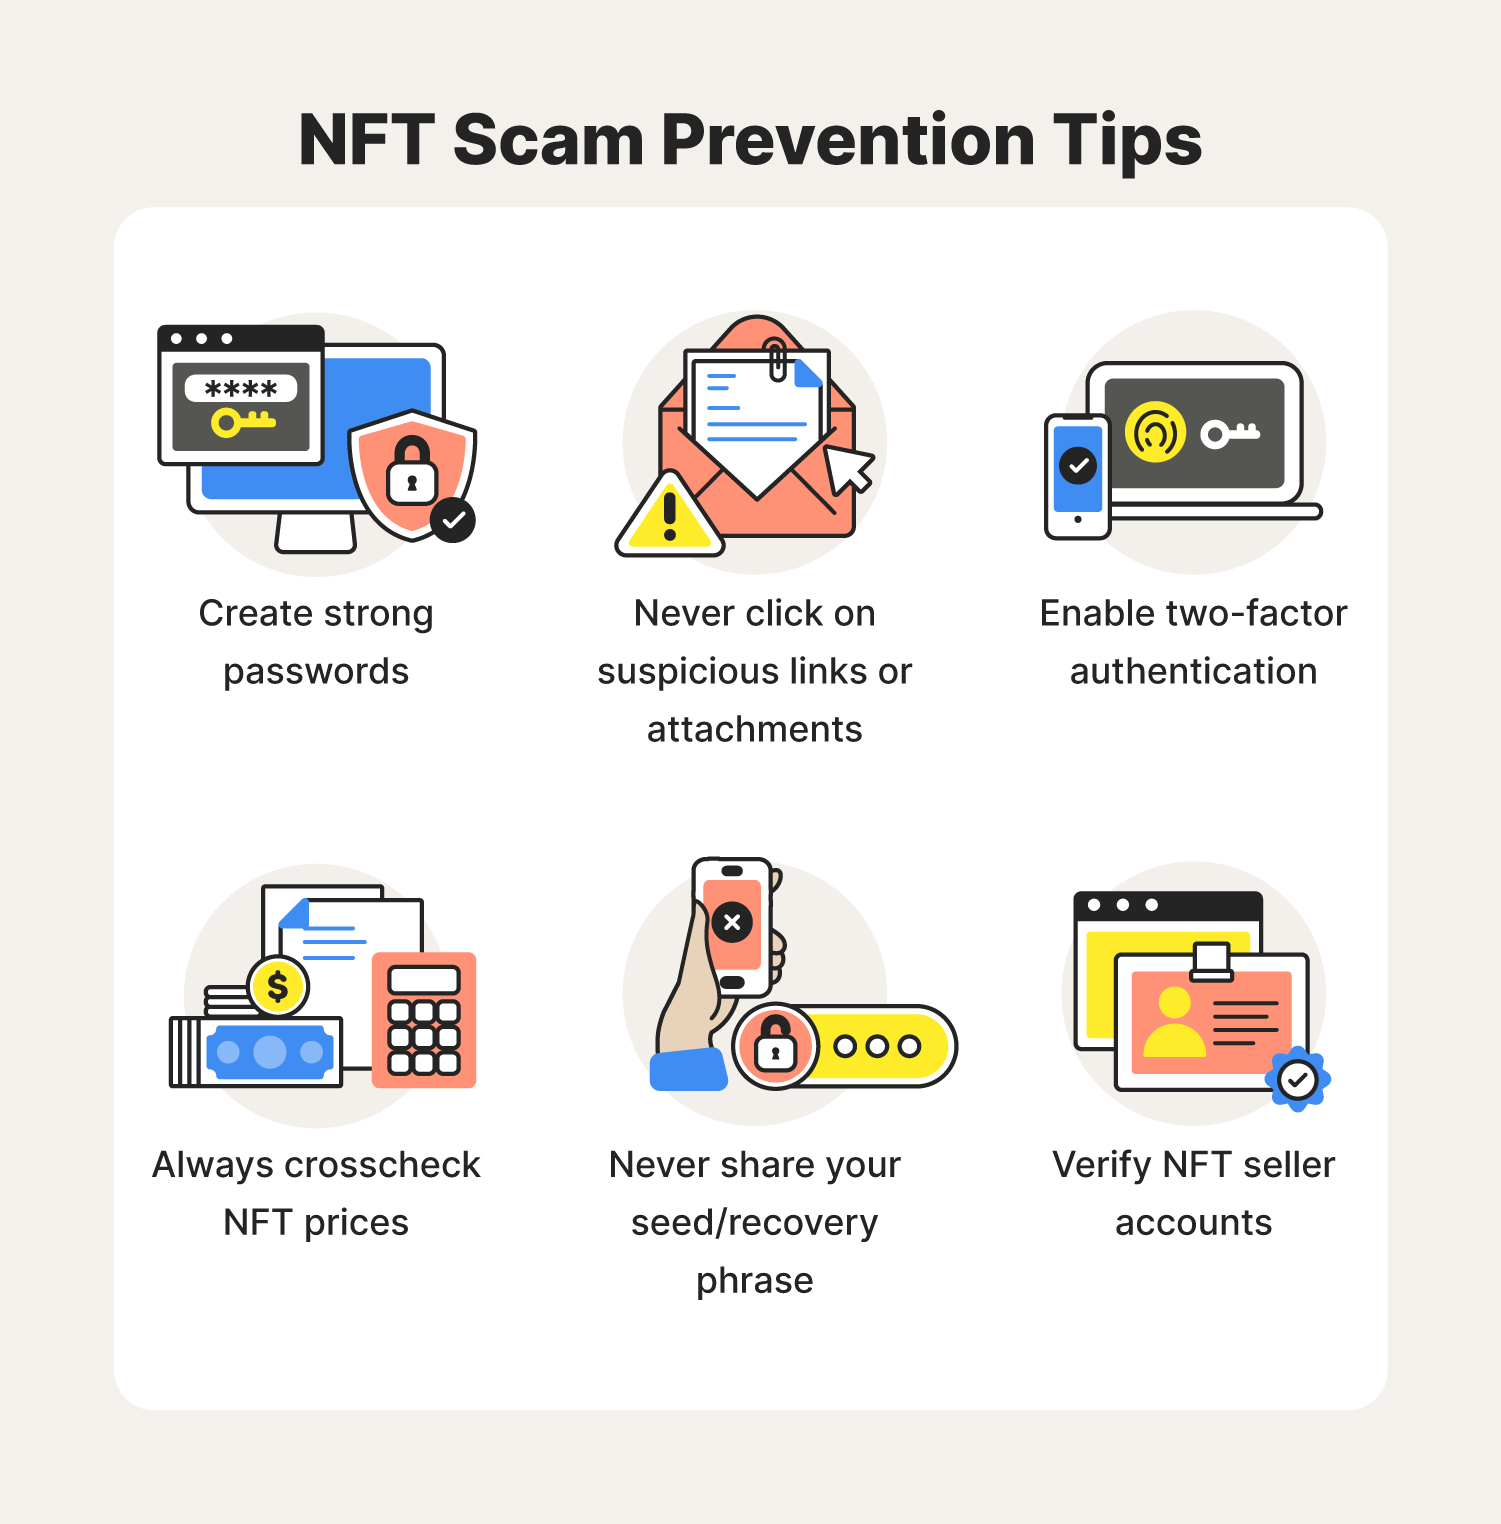  Six illustrations accompany the tips that can help you avoid the NFT scams deceiving unsuspecting crypto users. 